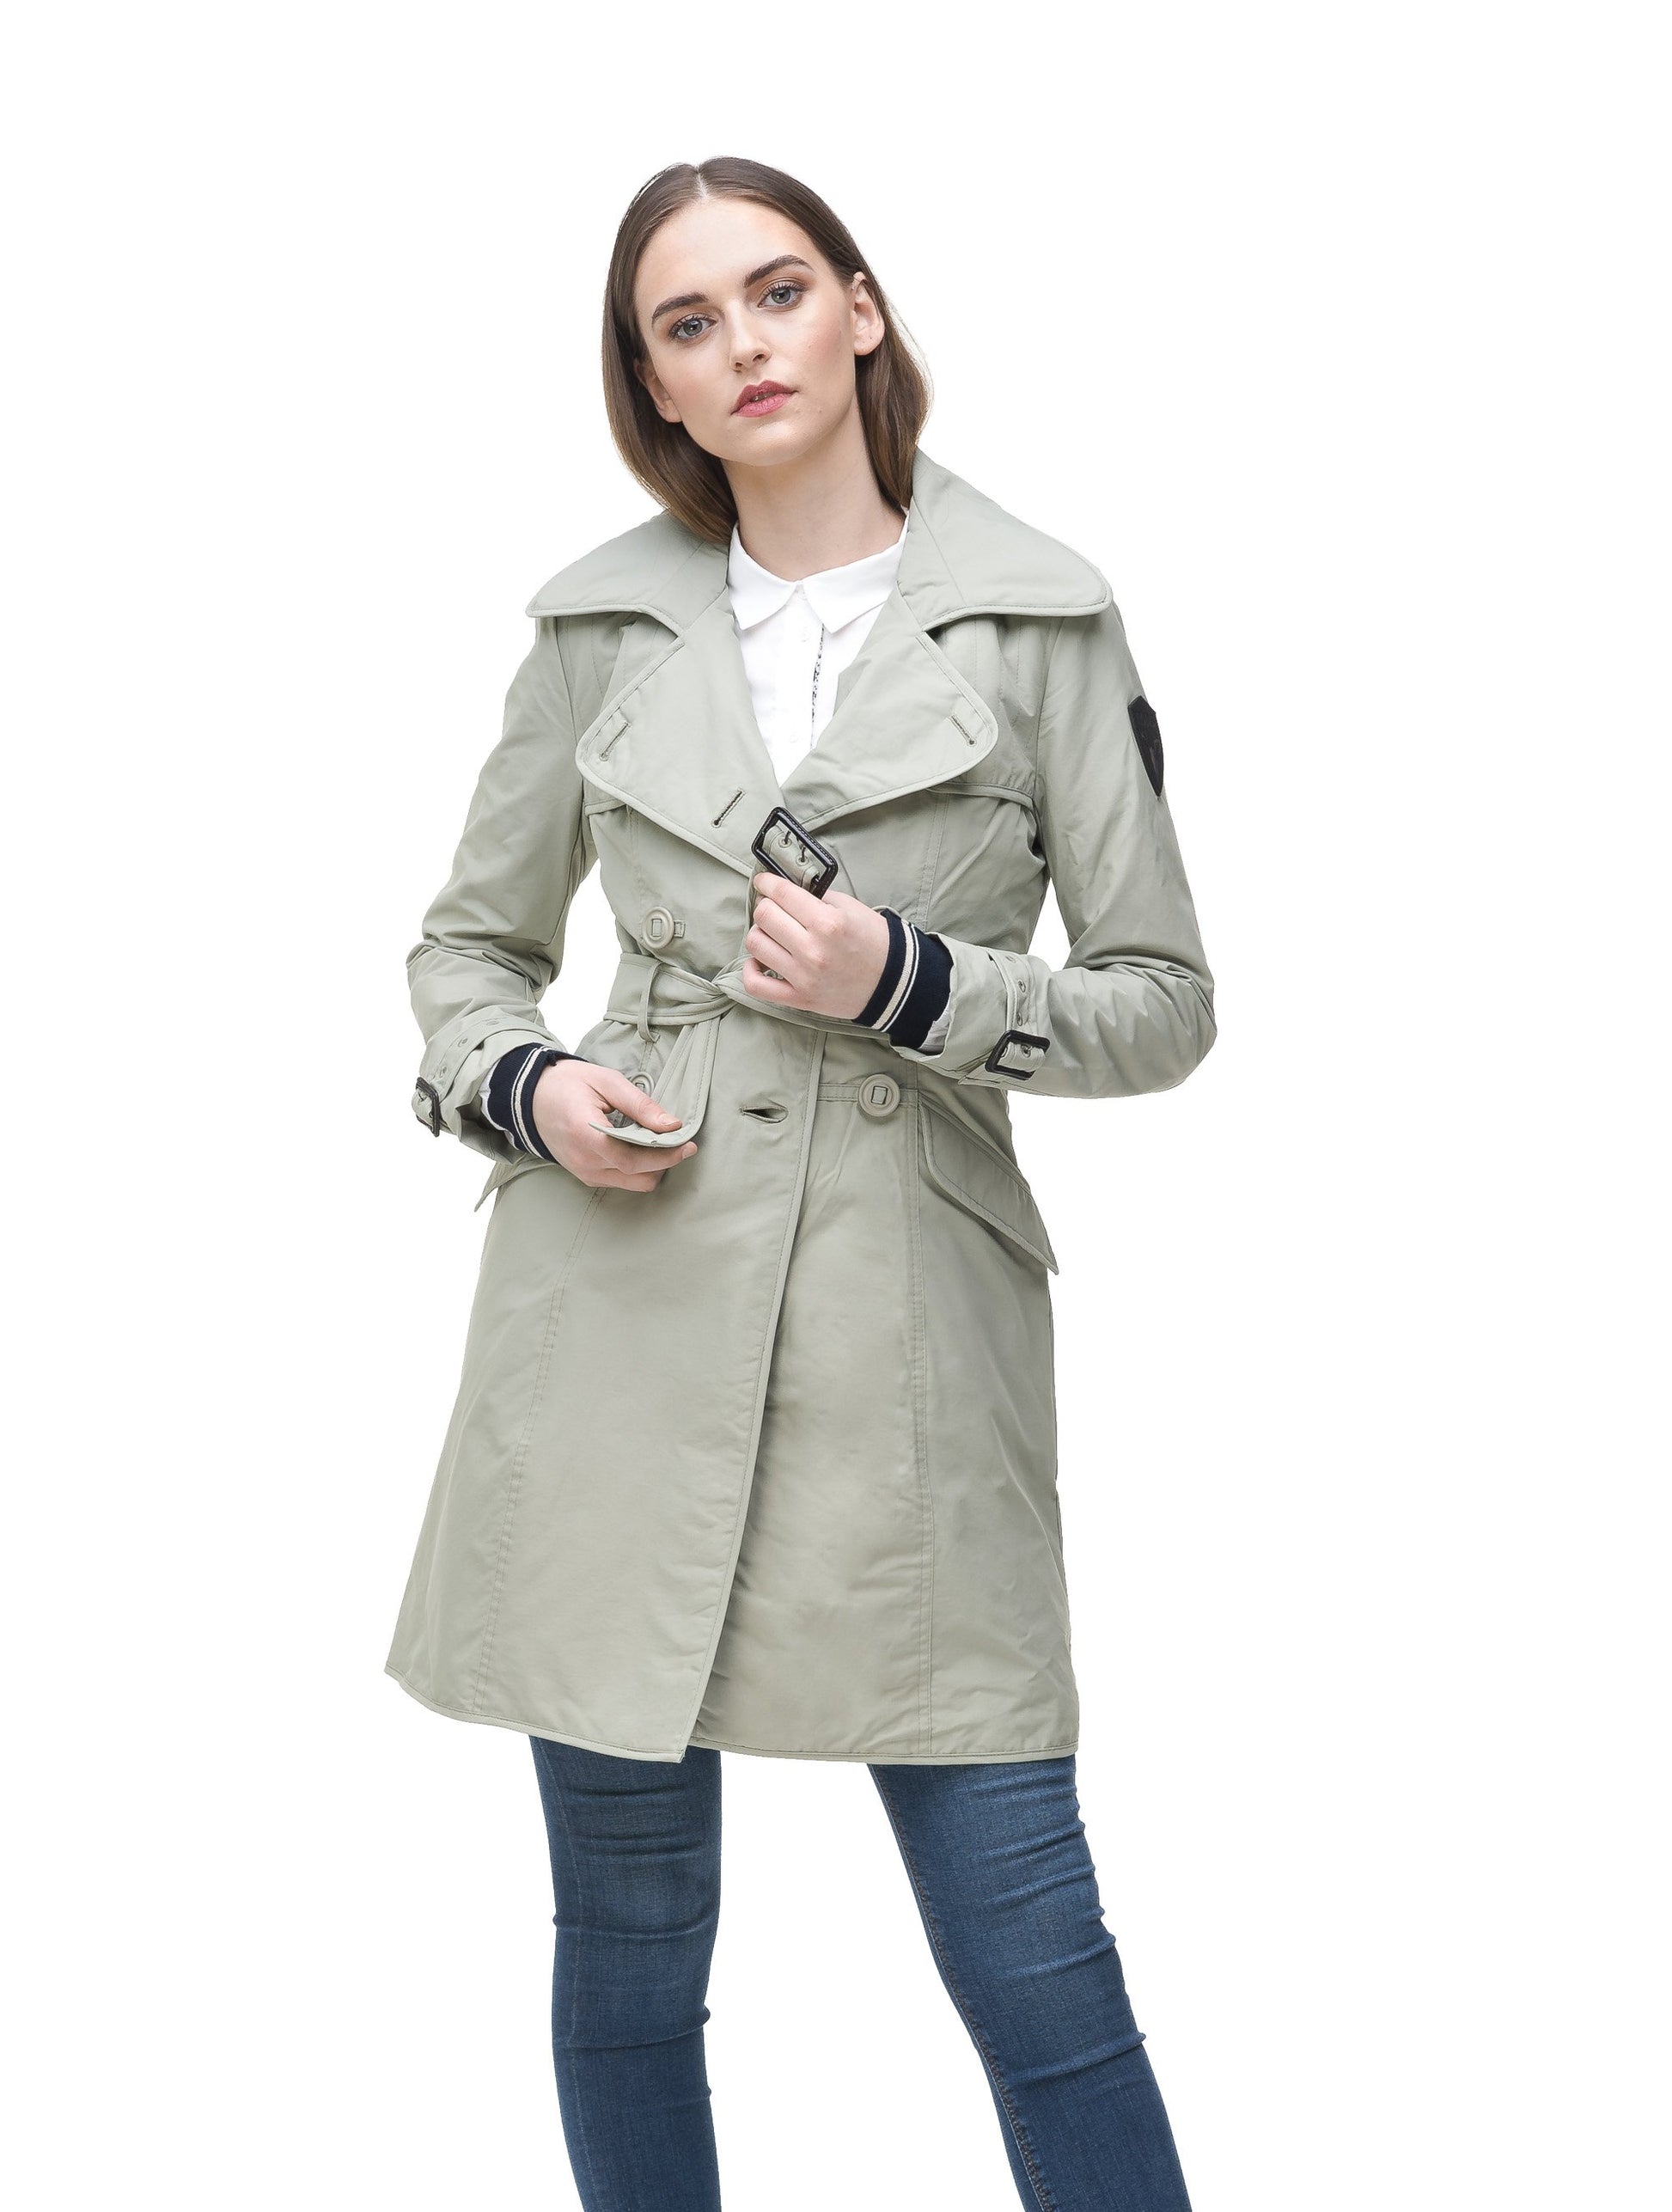 Women's classic trench coat that falls just above the knee in Light Grey